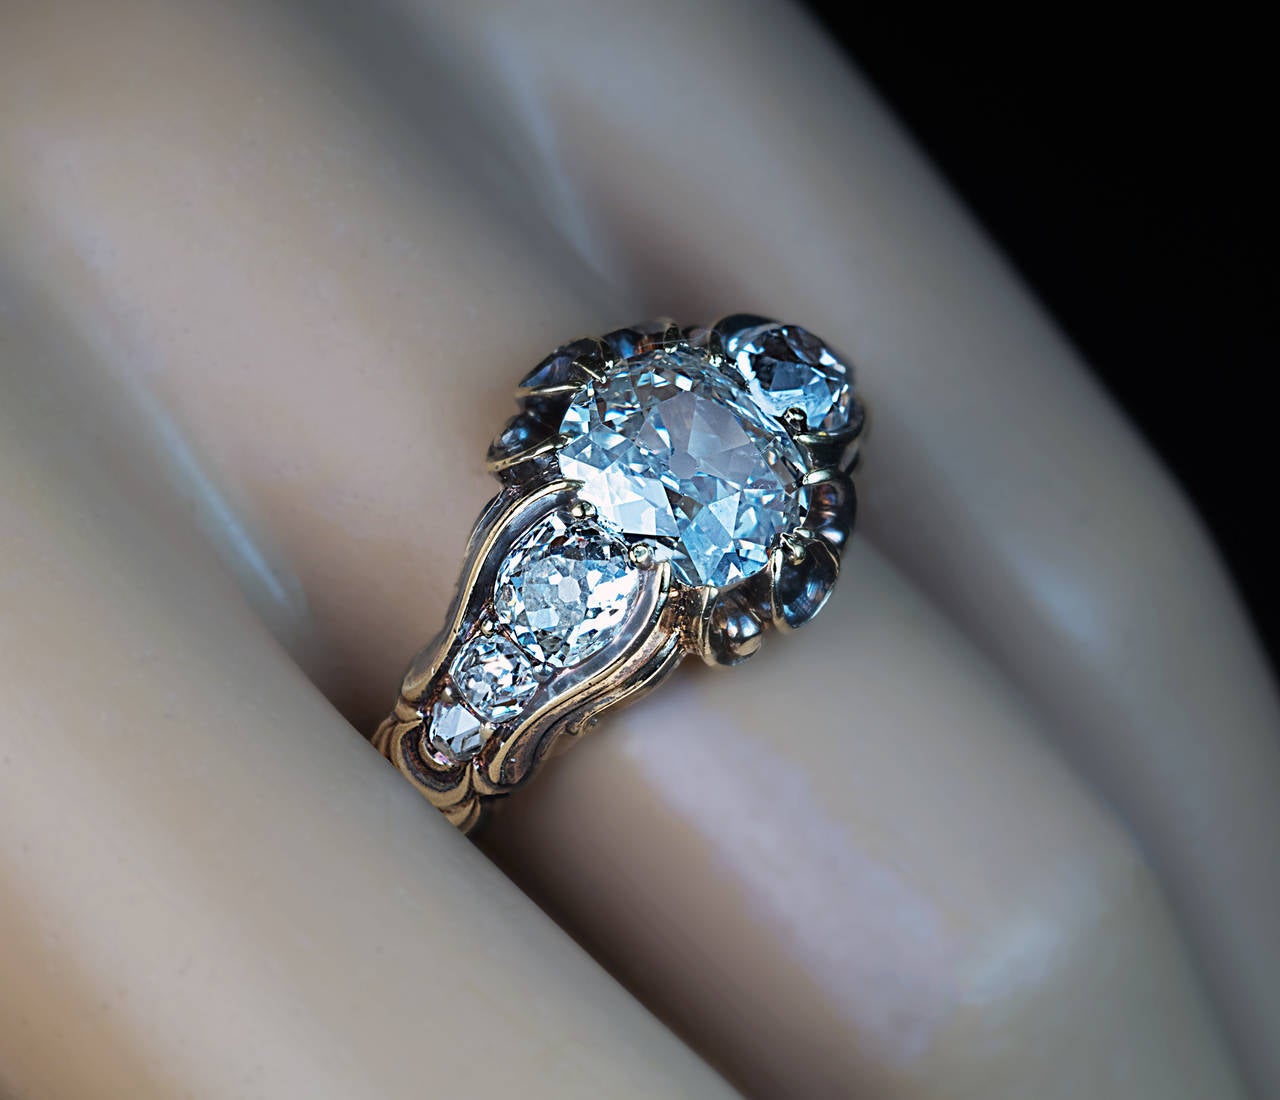 circa 1850

a unisex 7 stone diamond ring centered with an antique cushion cut diamond
8.1 x 7.2 x 3.4 mm, approximately 1.53 ct, I color, SI1 clarity

size 9